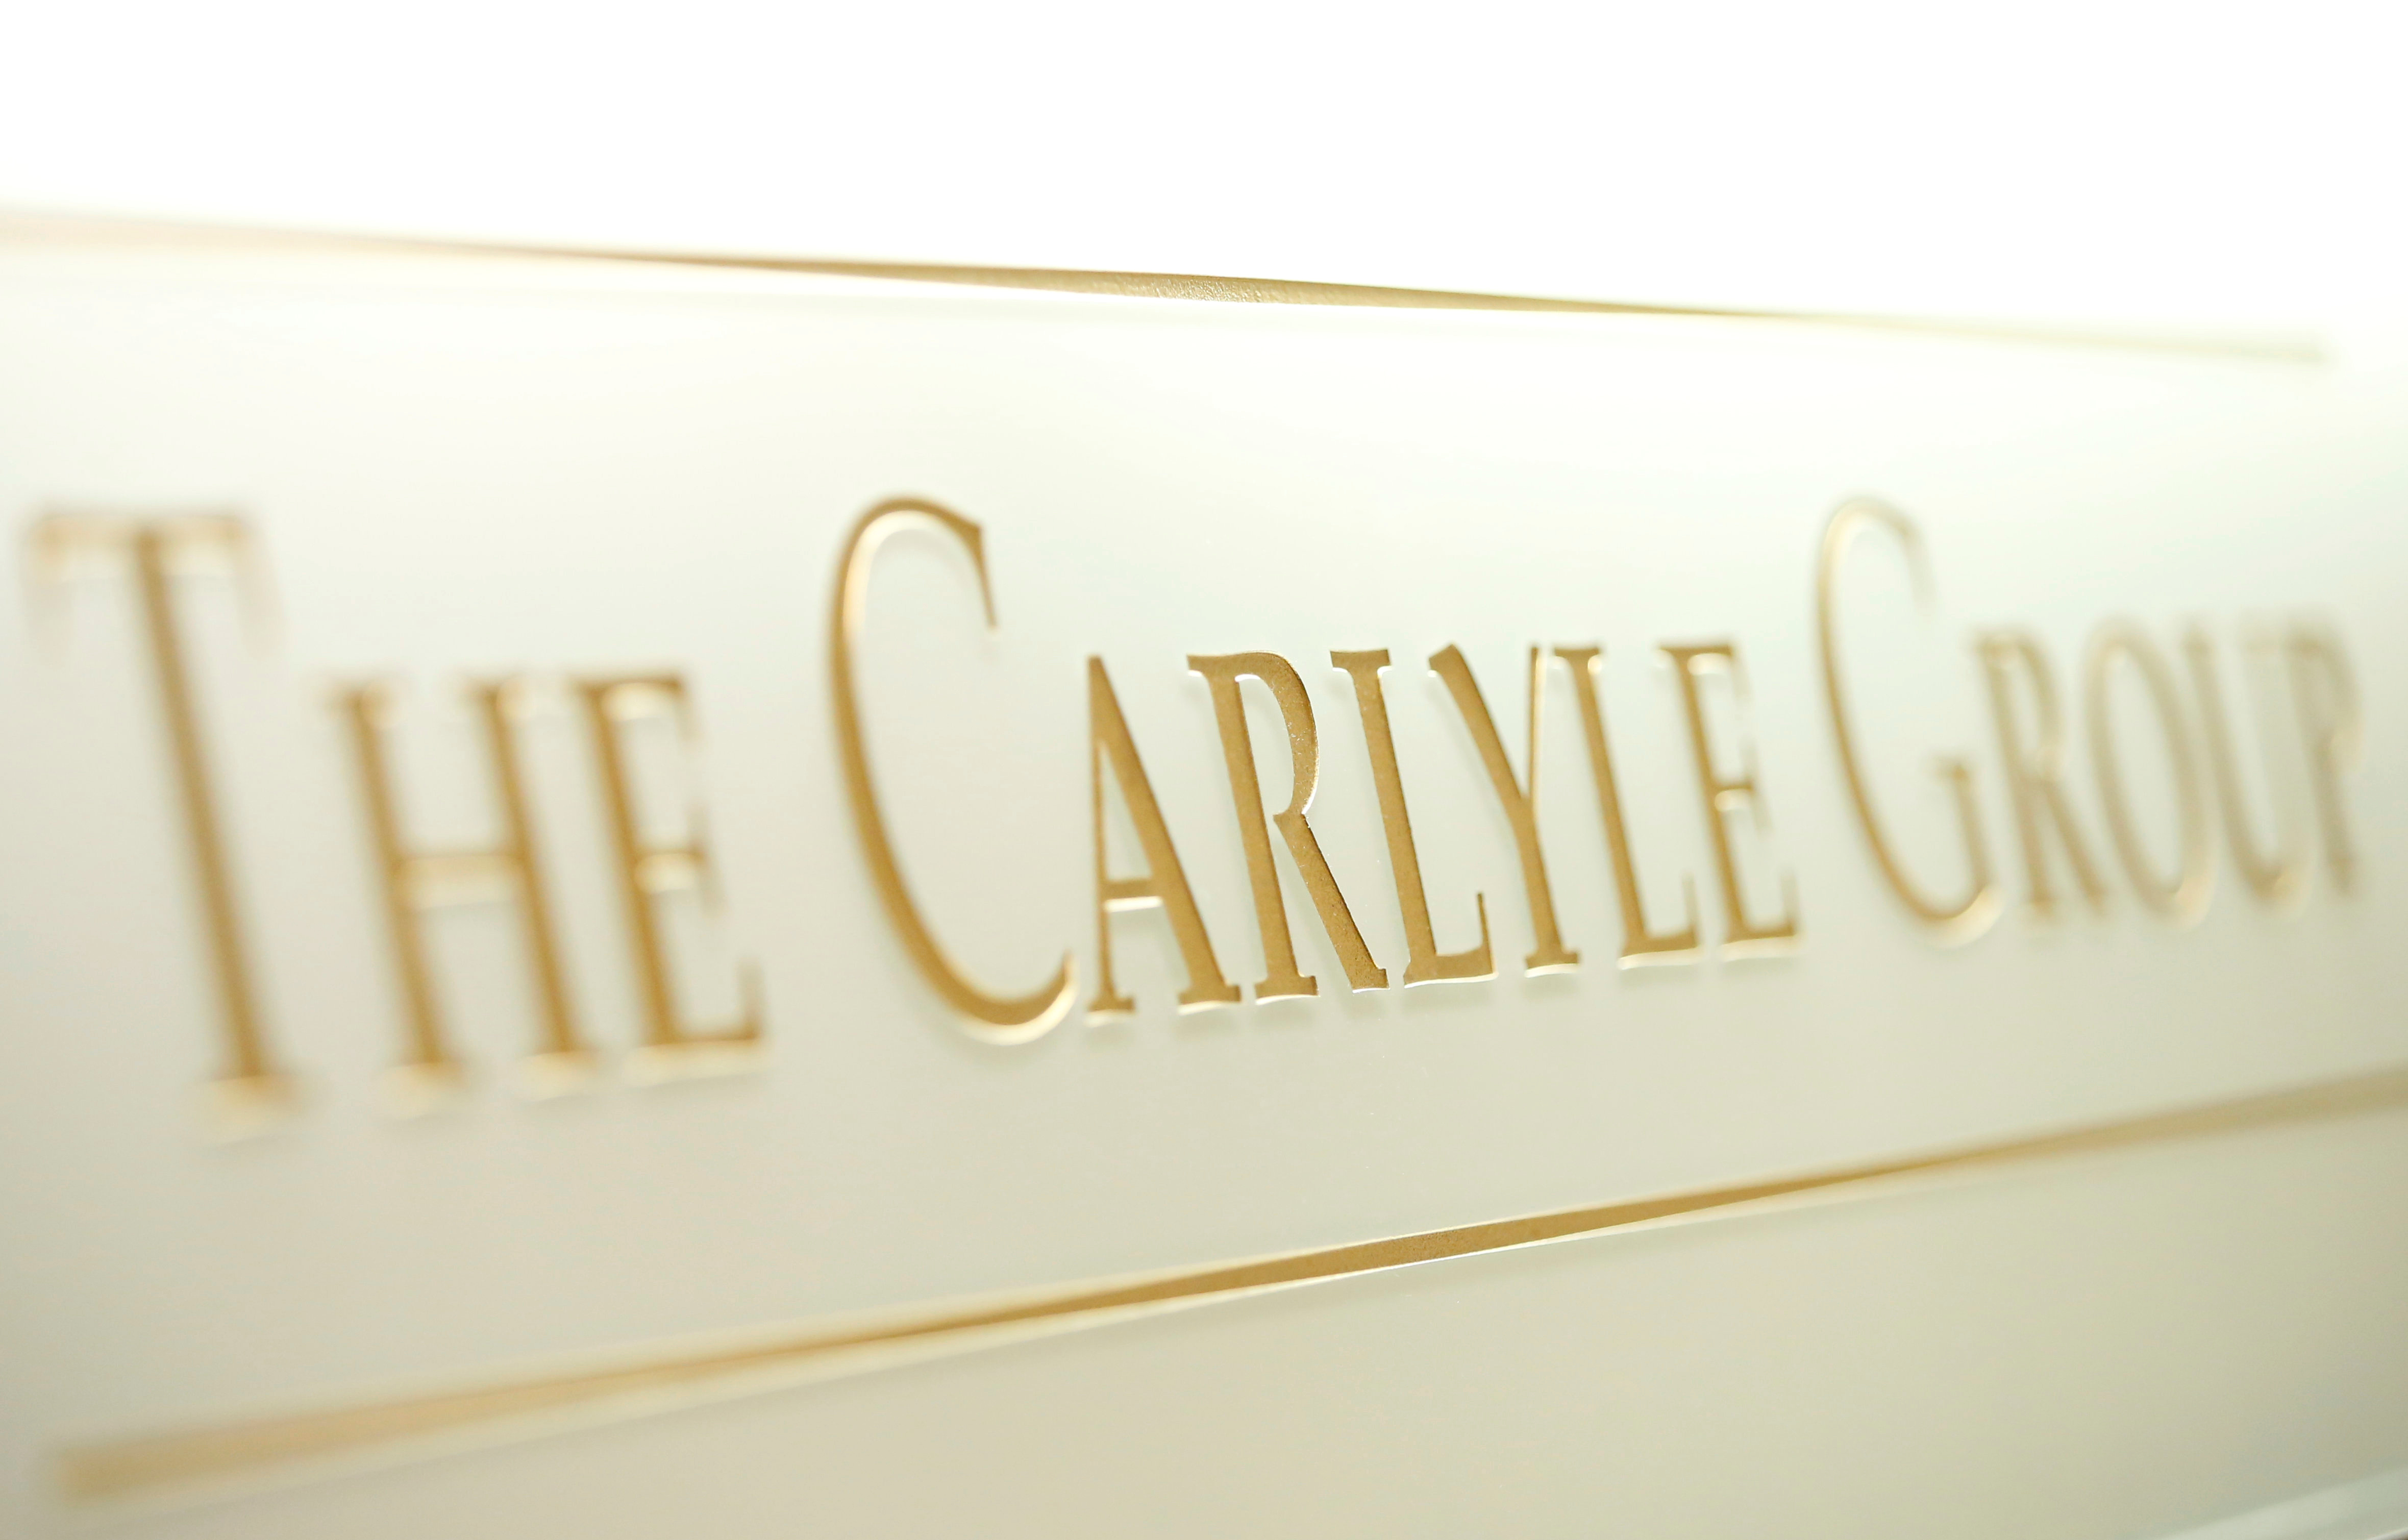 The logo of The Carlyle Group 